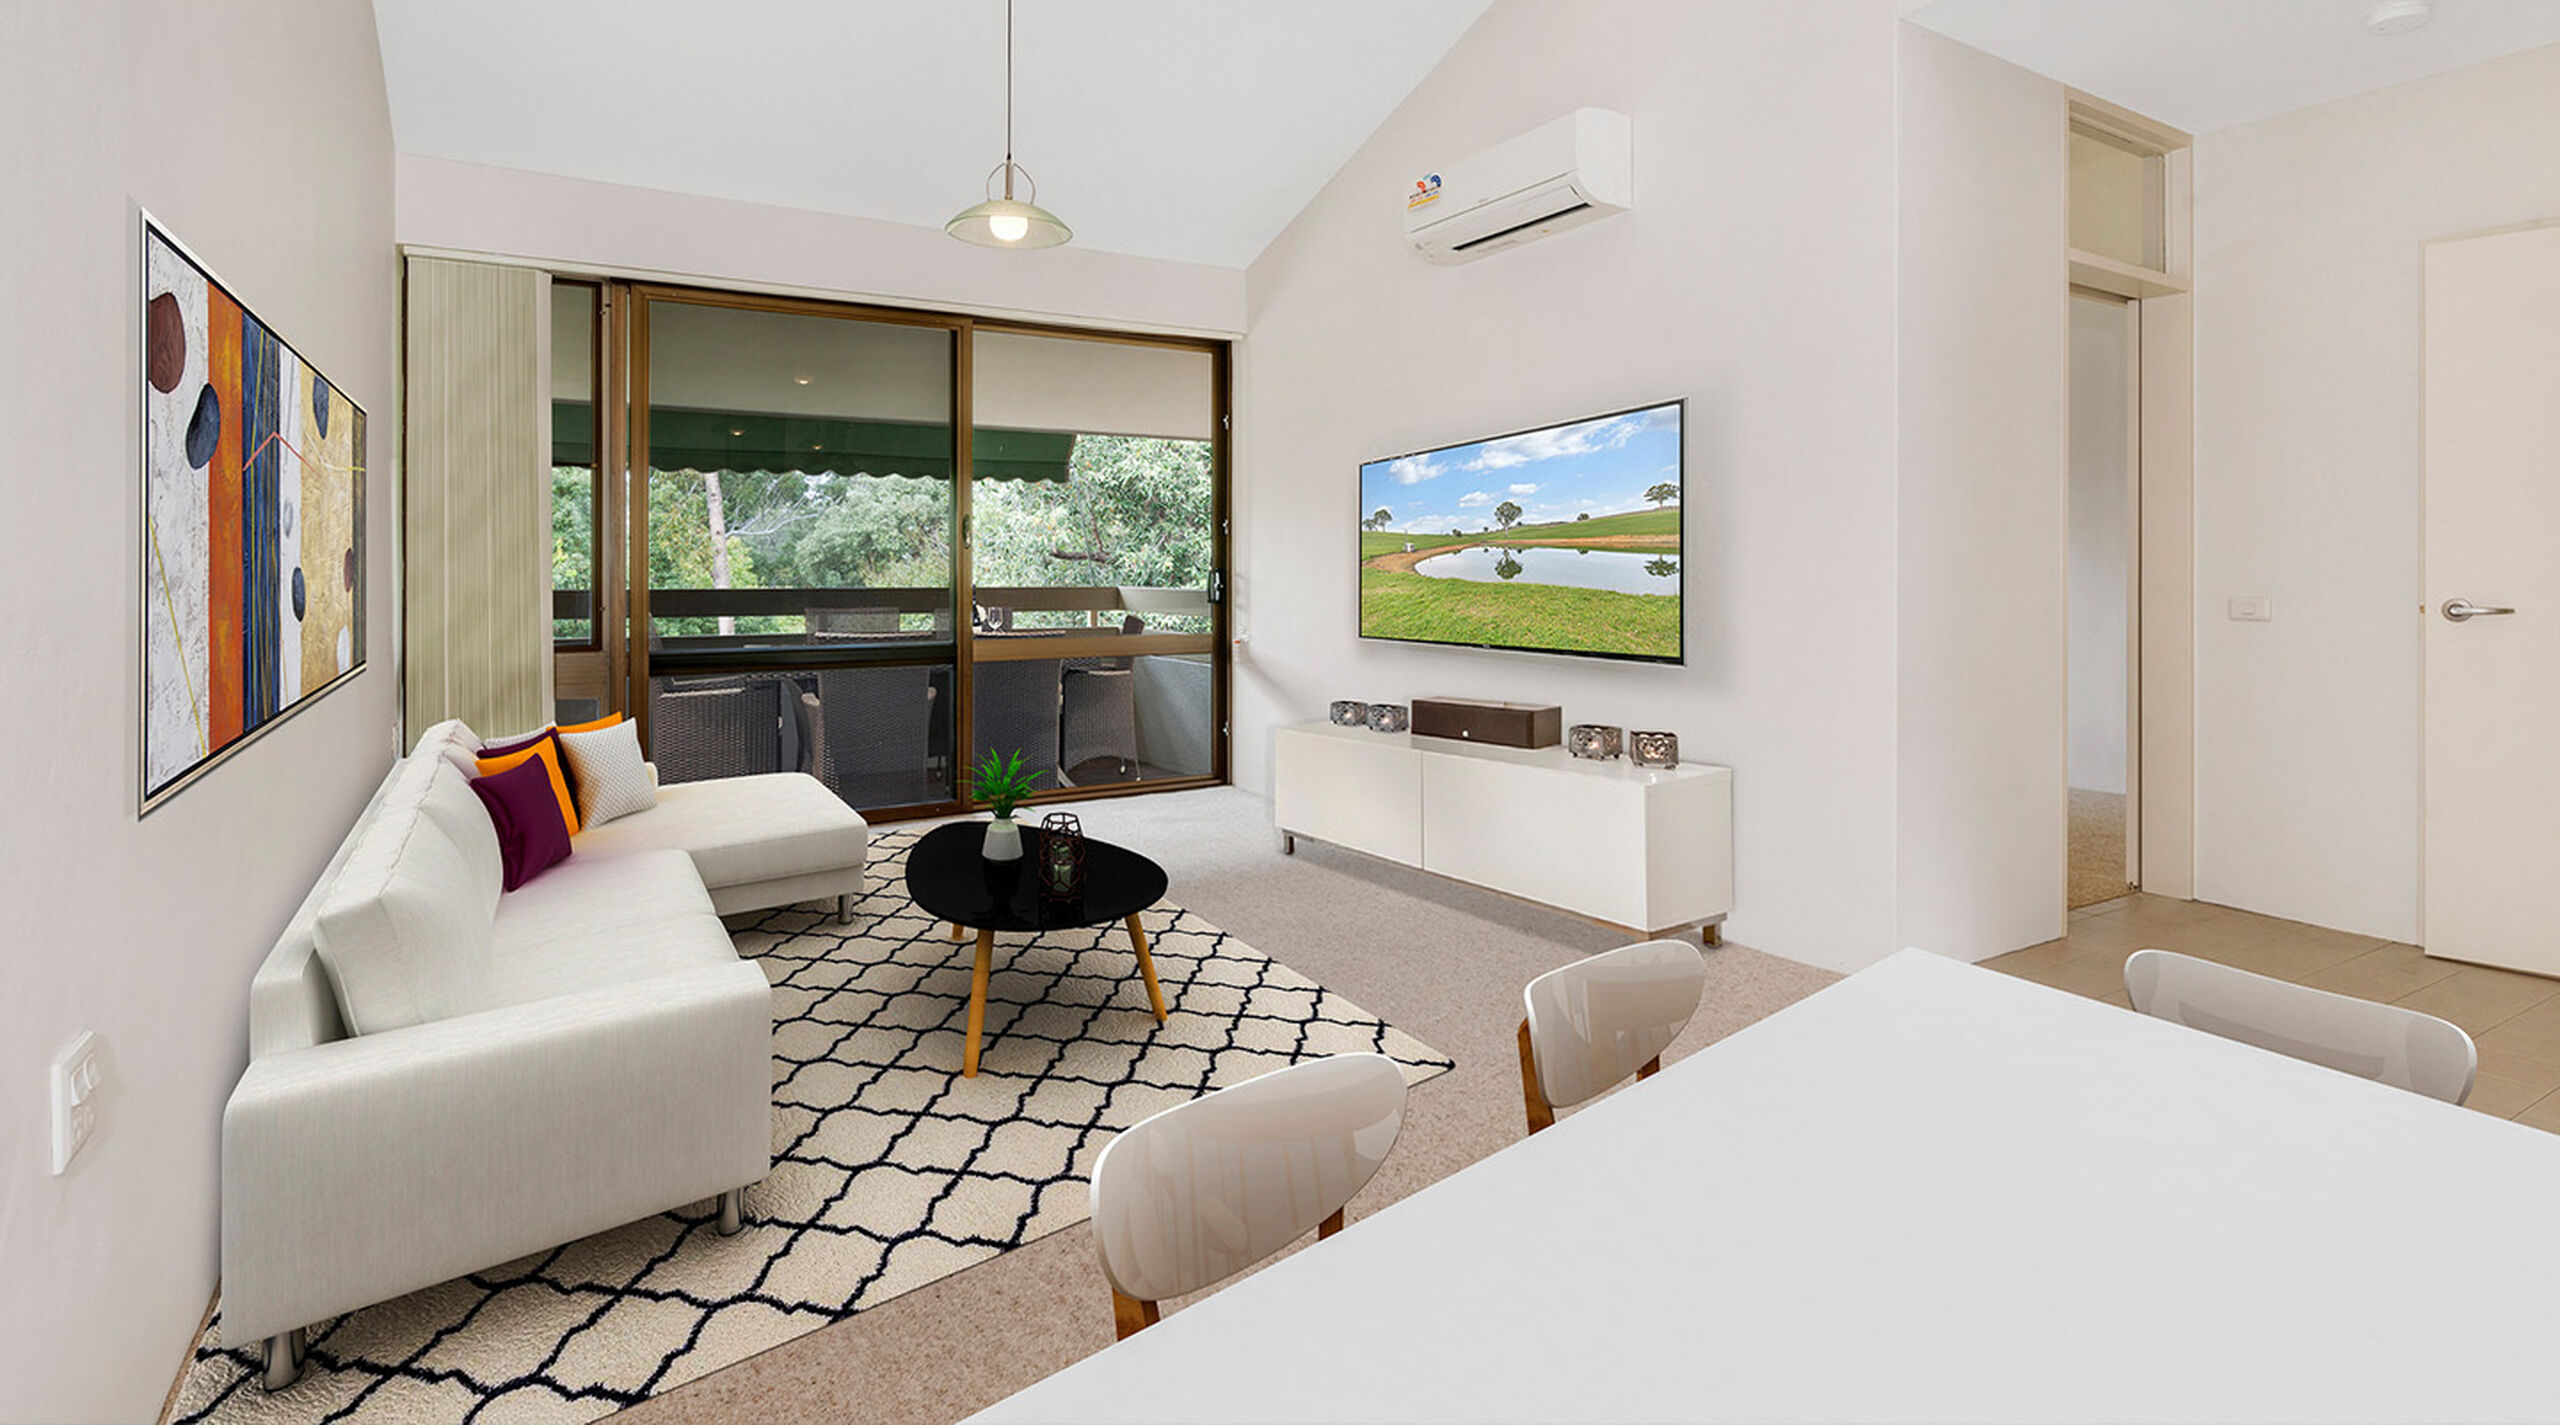 modern lounge room of a two bedroom retirement village apartment in bangor sydney with a balcony baptistcare warena village